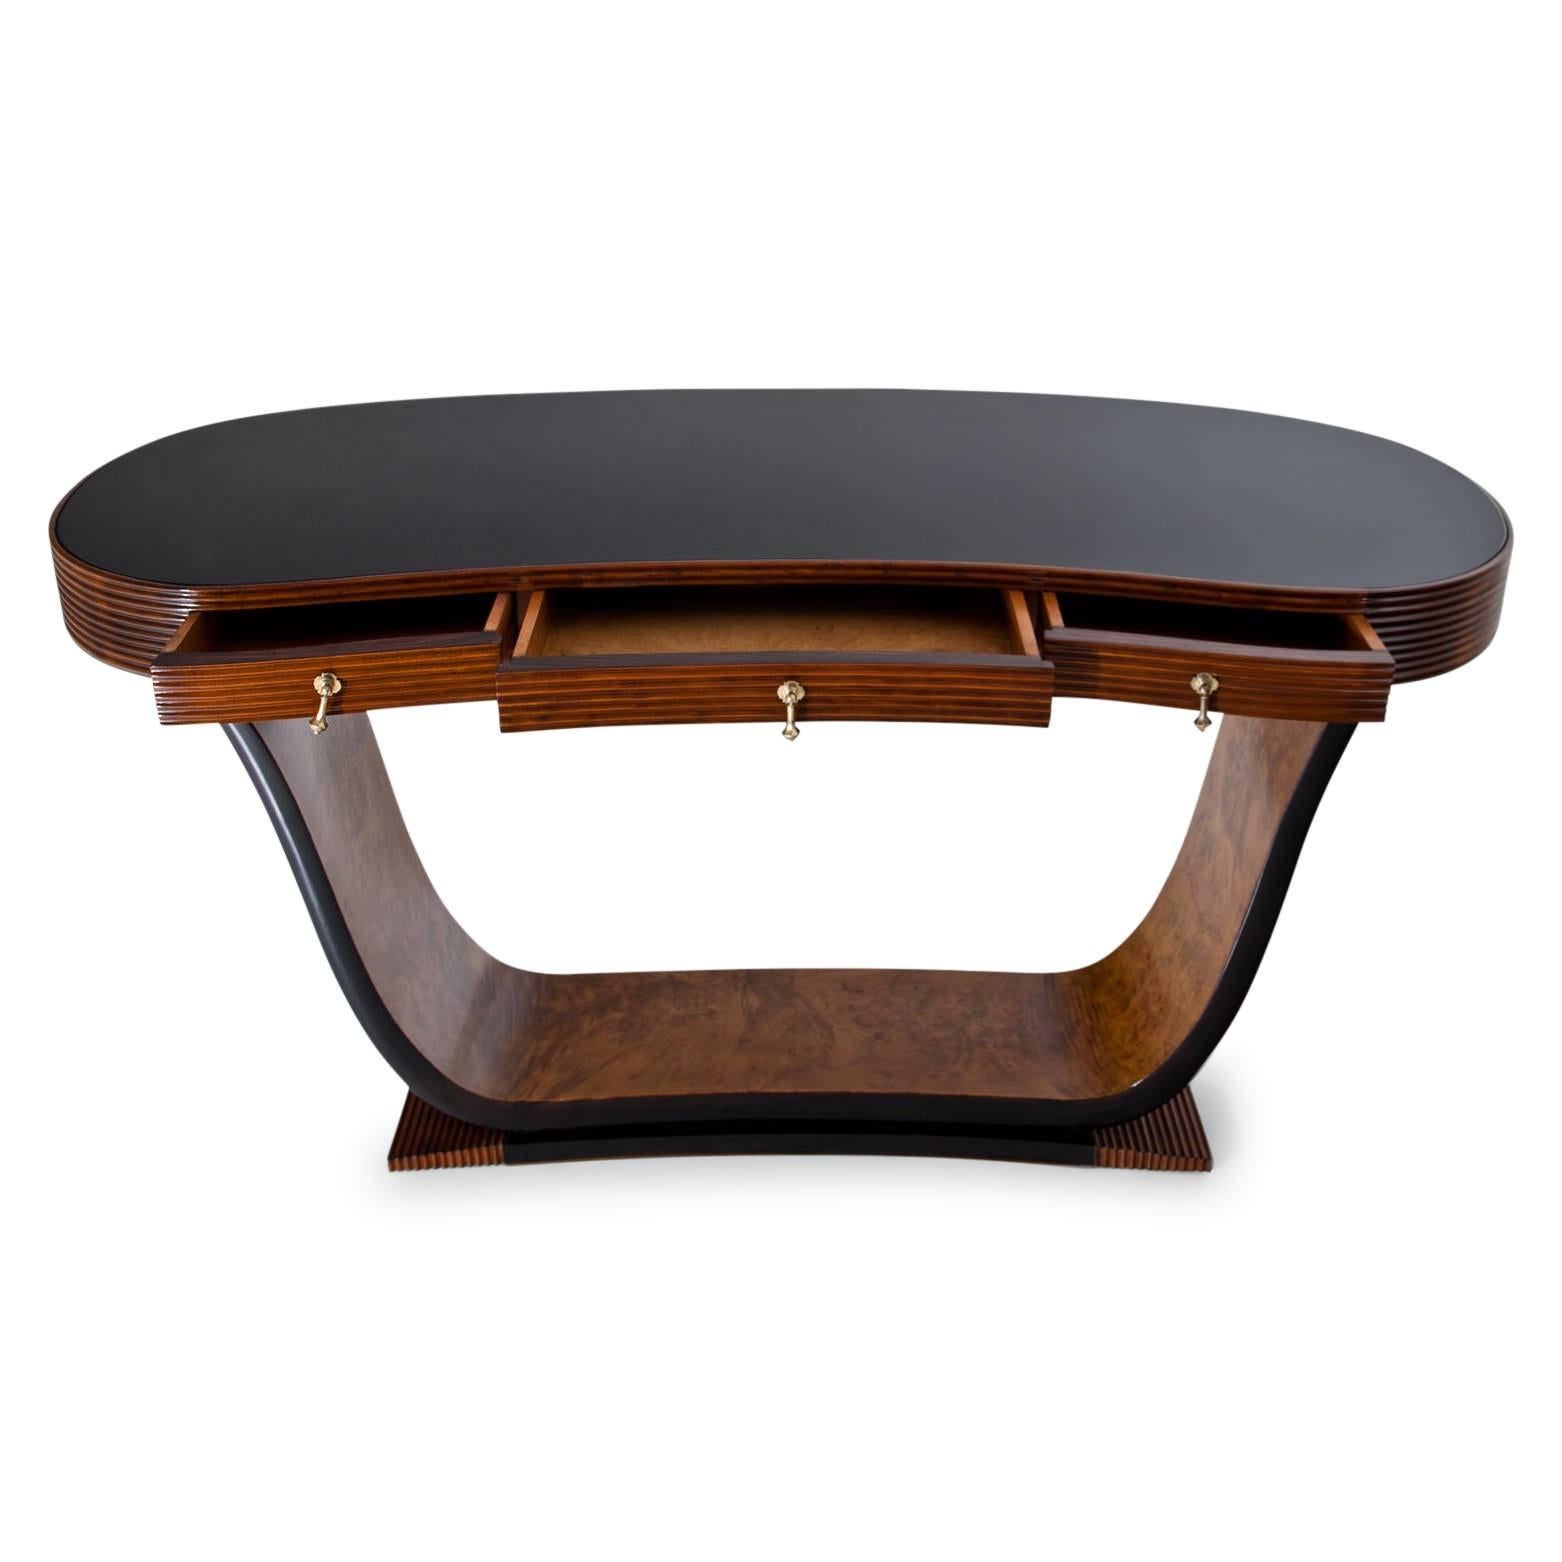 Kidney-shaped console table with a black glass tabletop, standing on a tulip-shaped base. The body shows horizontal groves and has three drawers. The console is in a professionally refurbished condition.